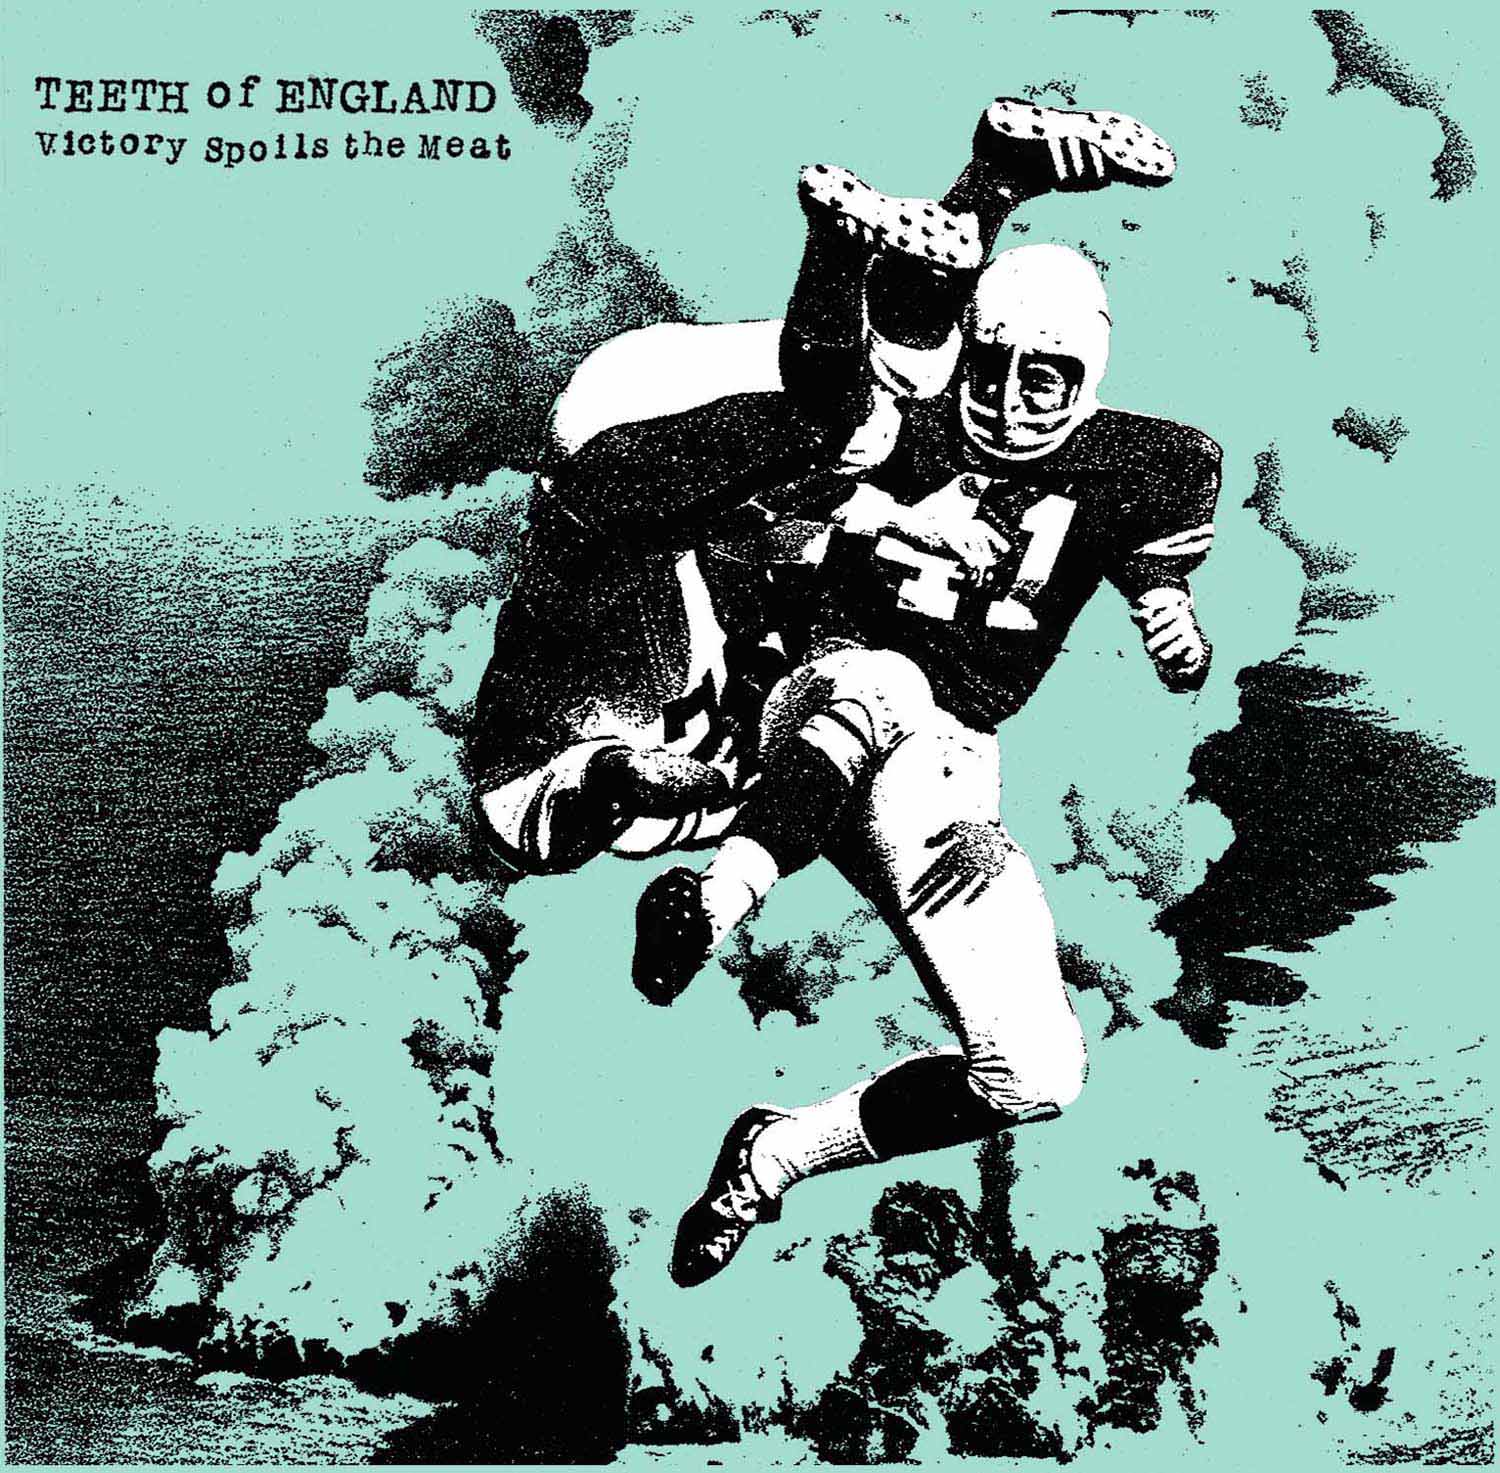 Teeth of England "Victory Spoils the Meat"